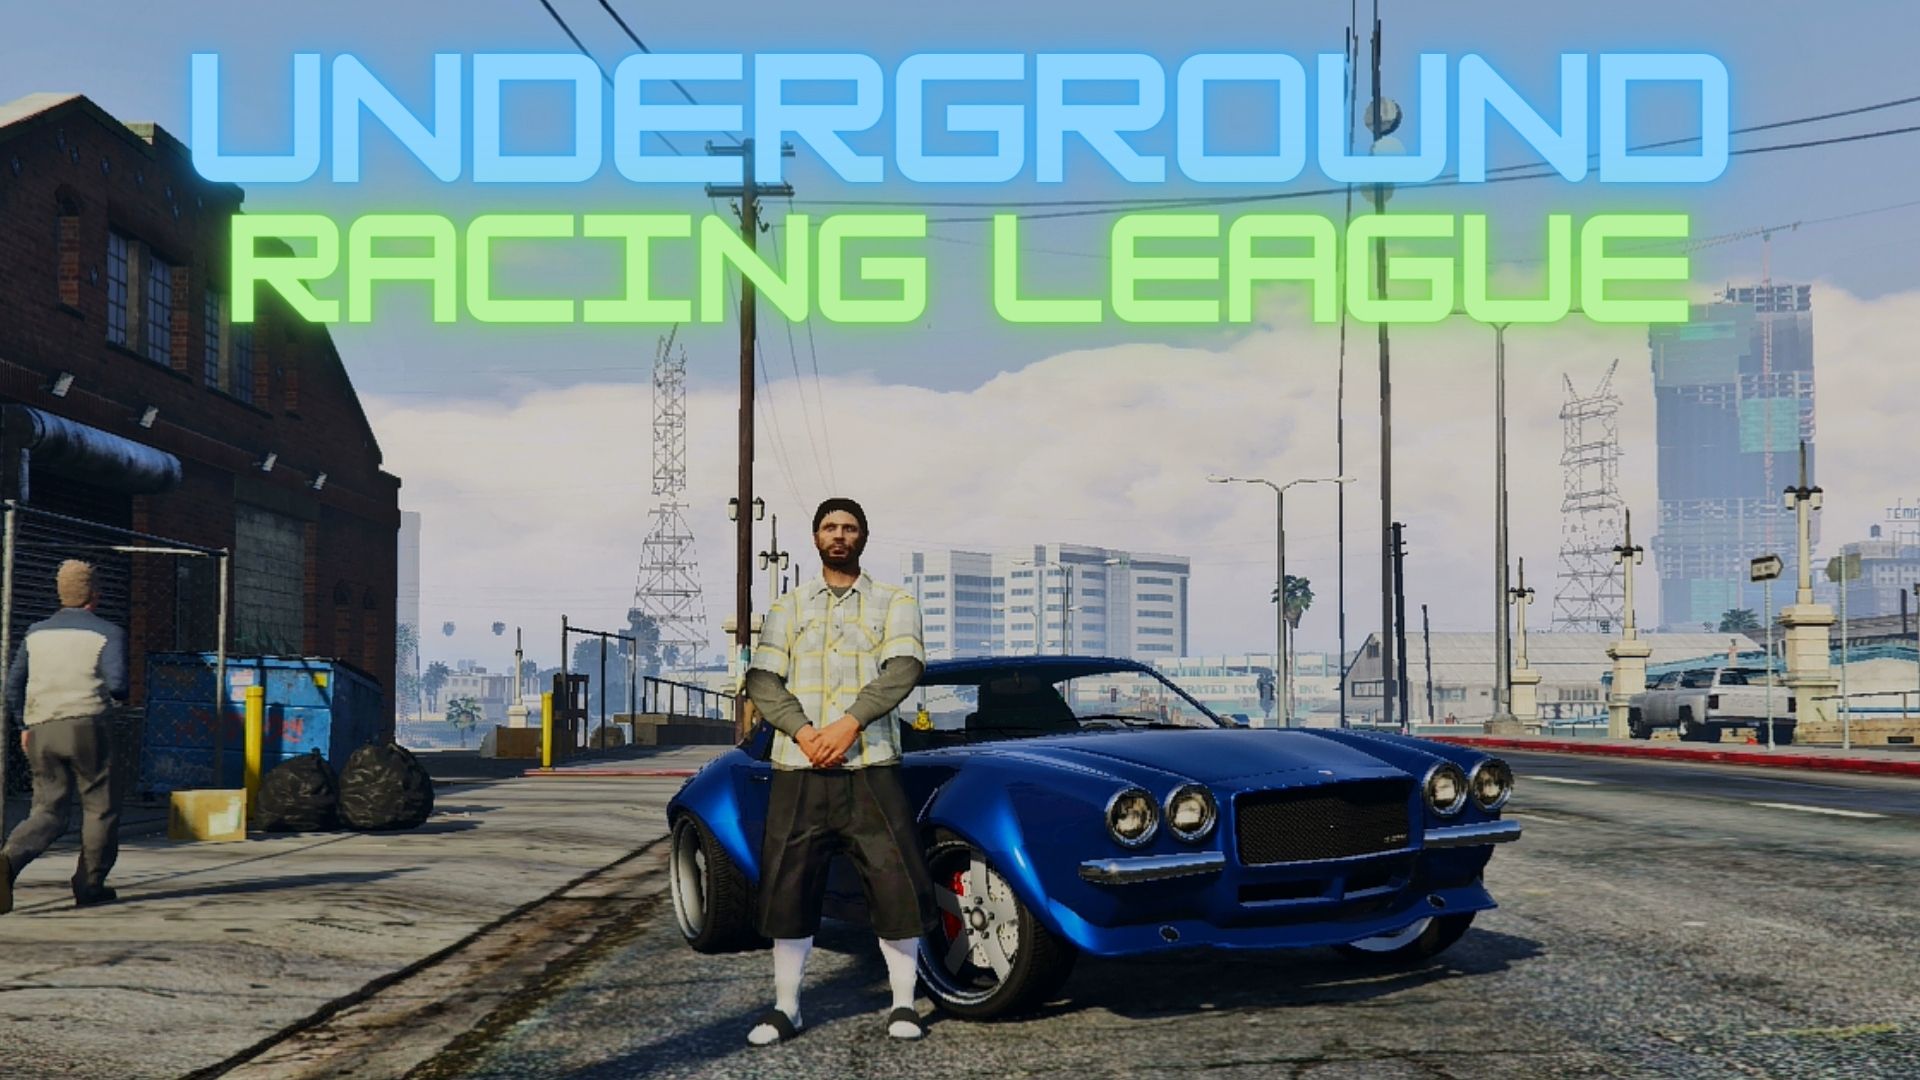 Underground Racing League - Back Alley Race